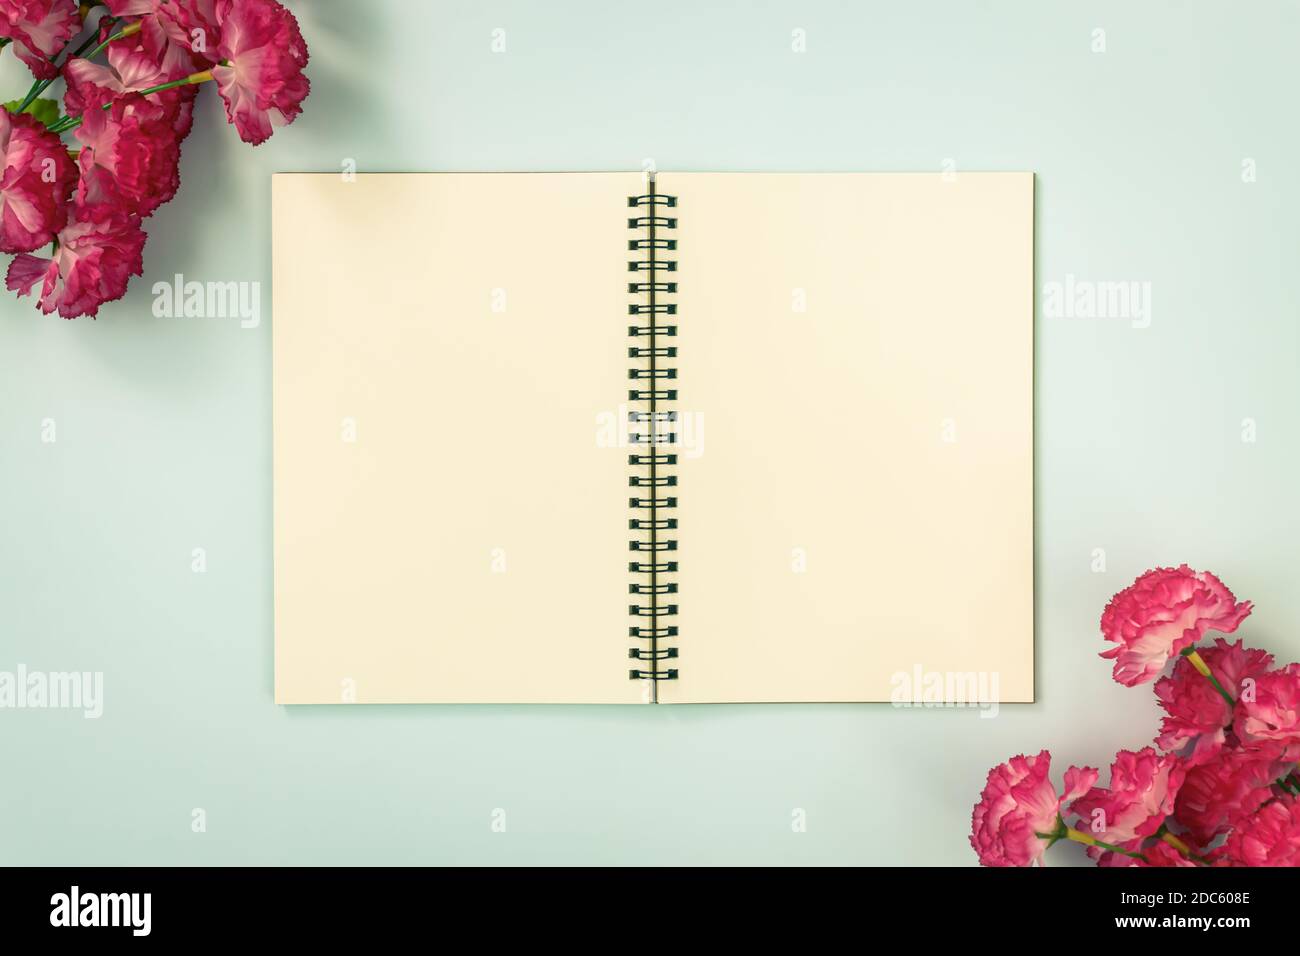 Top Table Spiral Notebook or Spring Notebook Mockup in Unlined Type on Center Frame and Red Flowers at Bottom Left and Top Right Corner on Blue Pastel Stock Photo